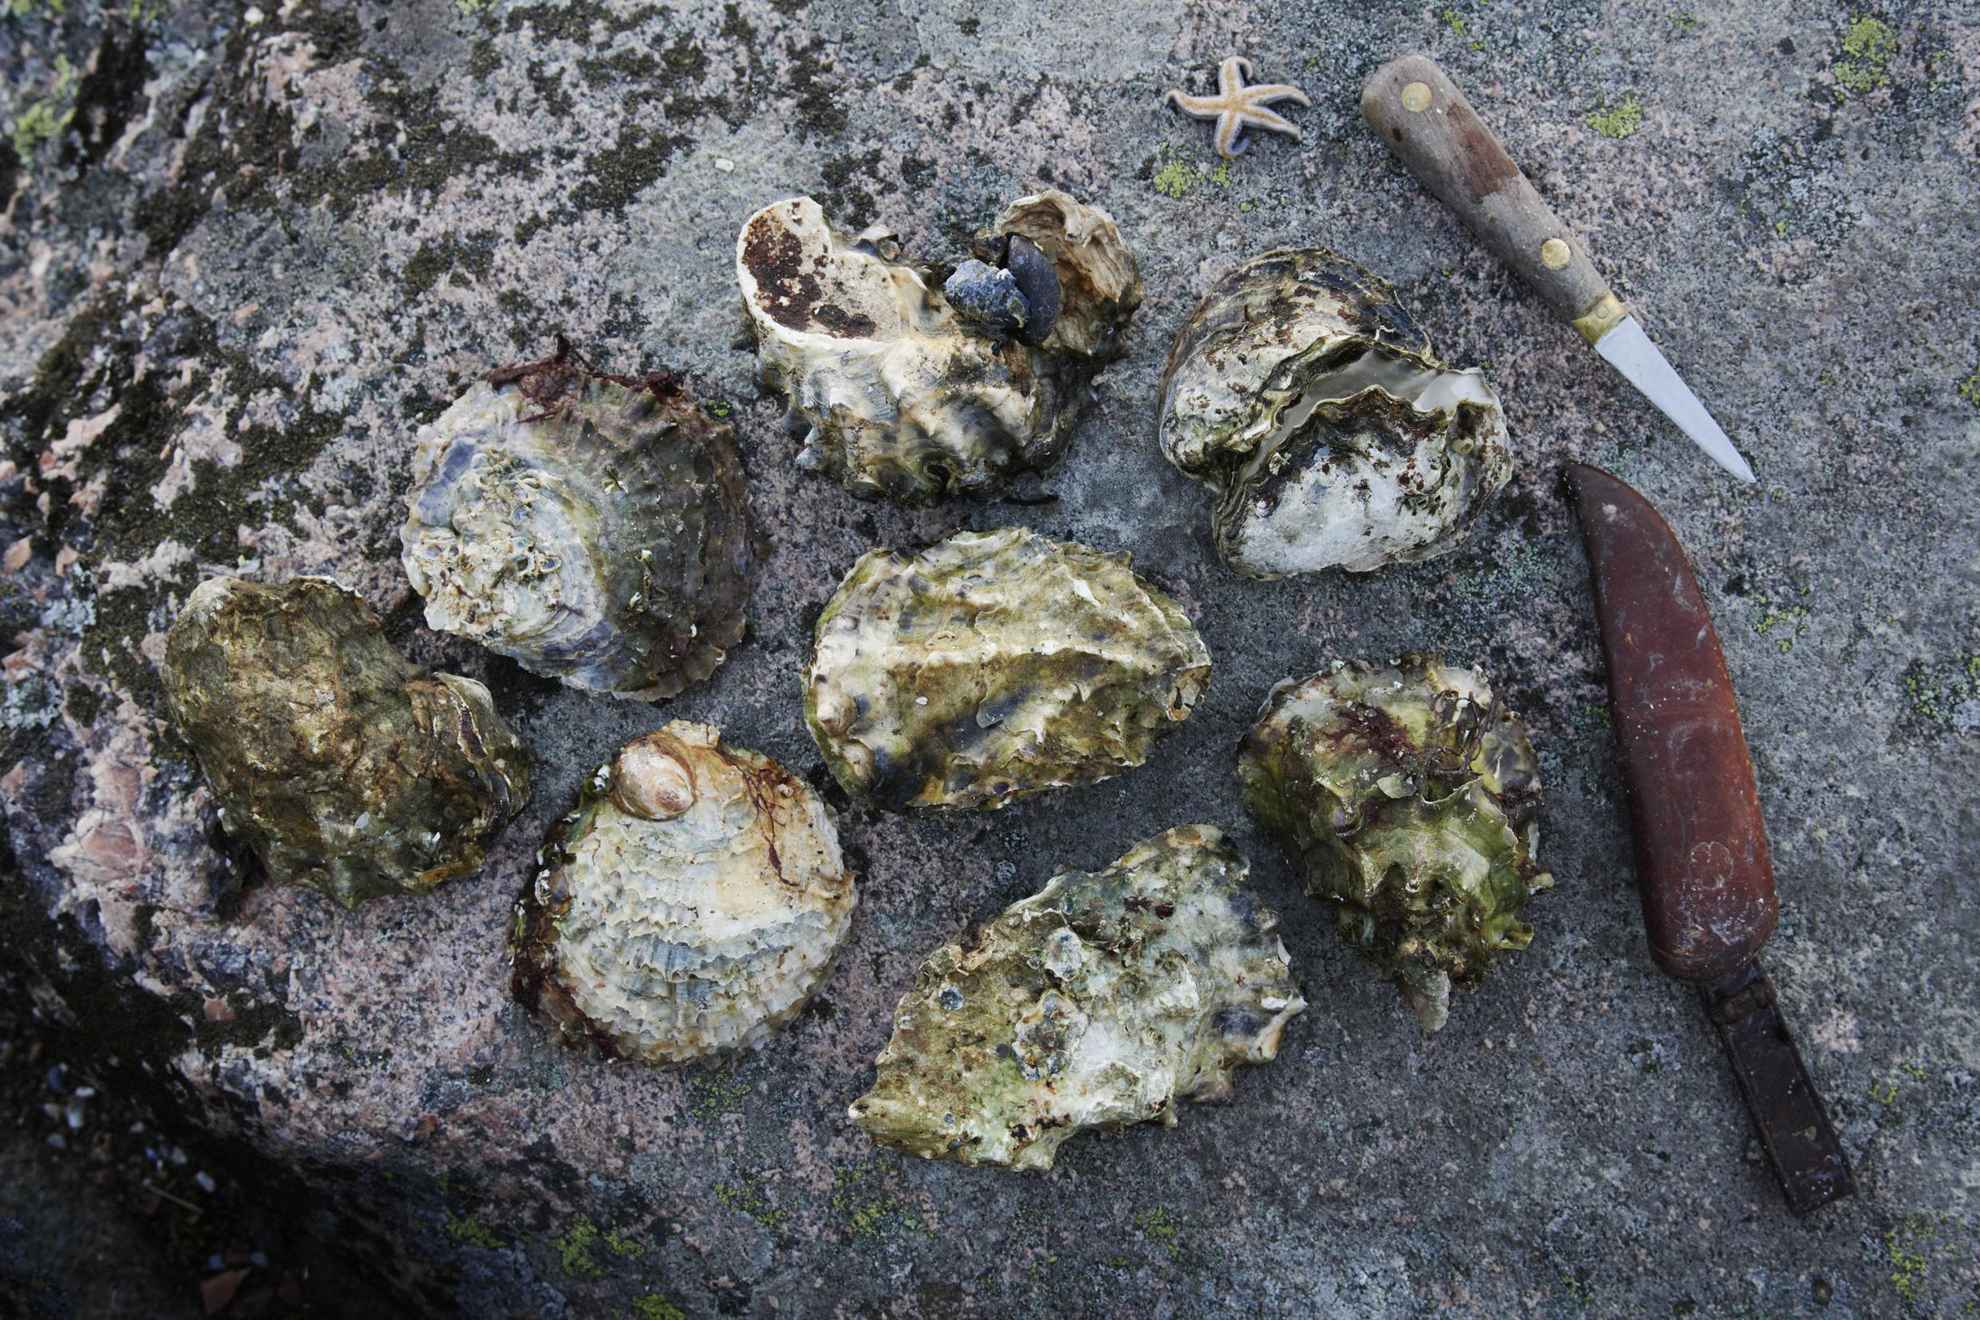 Several oysters, a knife and a small starfish on a rock.